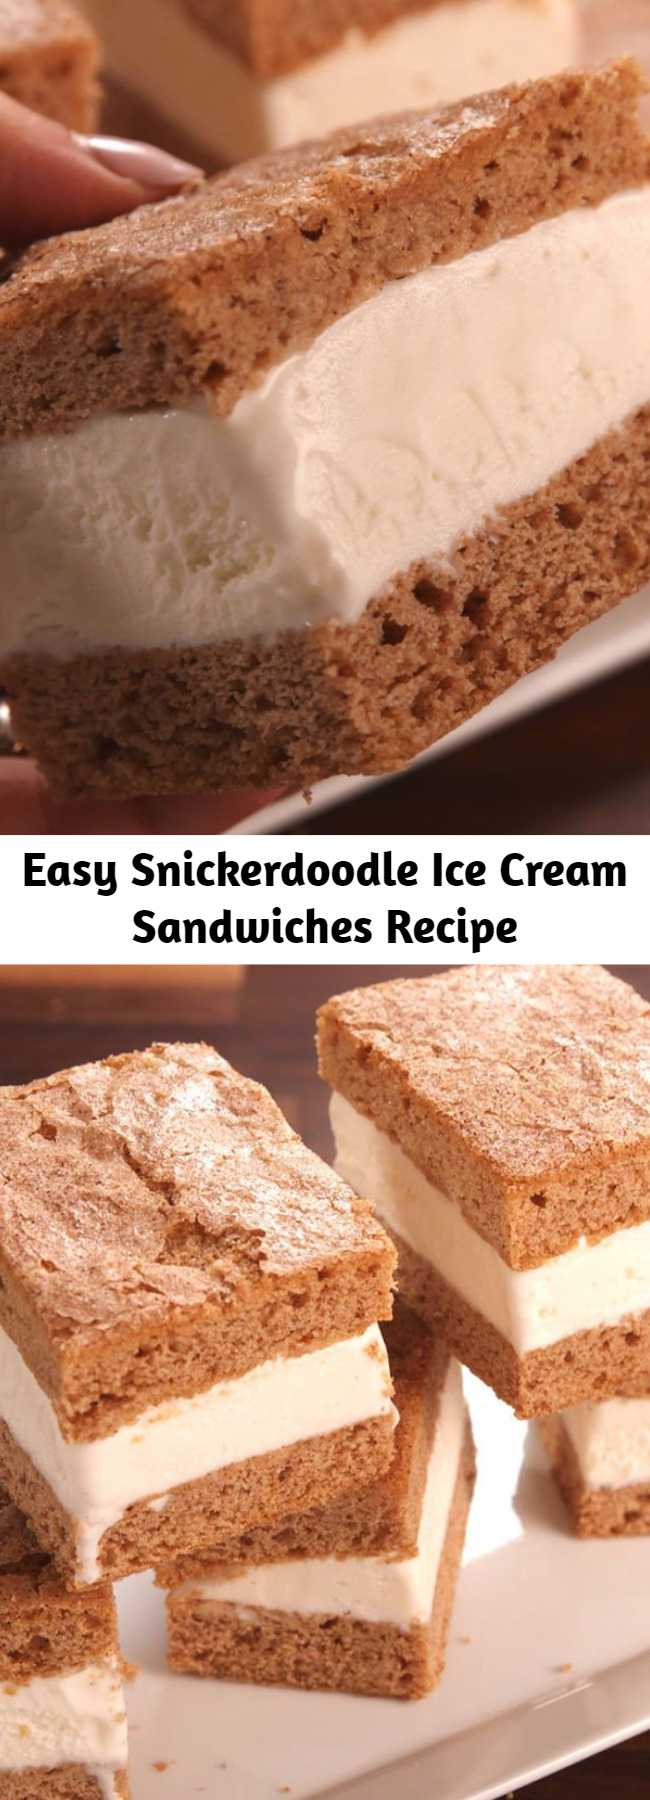 Easy Snickerdoodle Ice Cream Sandwiches Recipe - Who needs a chocolate ice cream sandwich when you can have these snickerdoodle. Why have we not done this before?